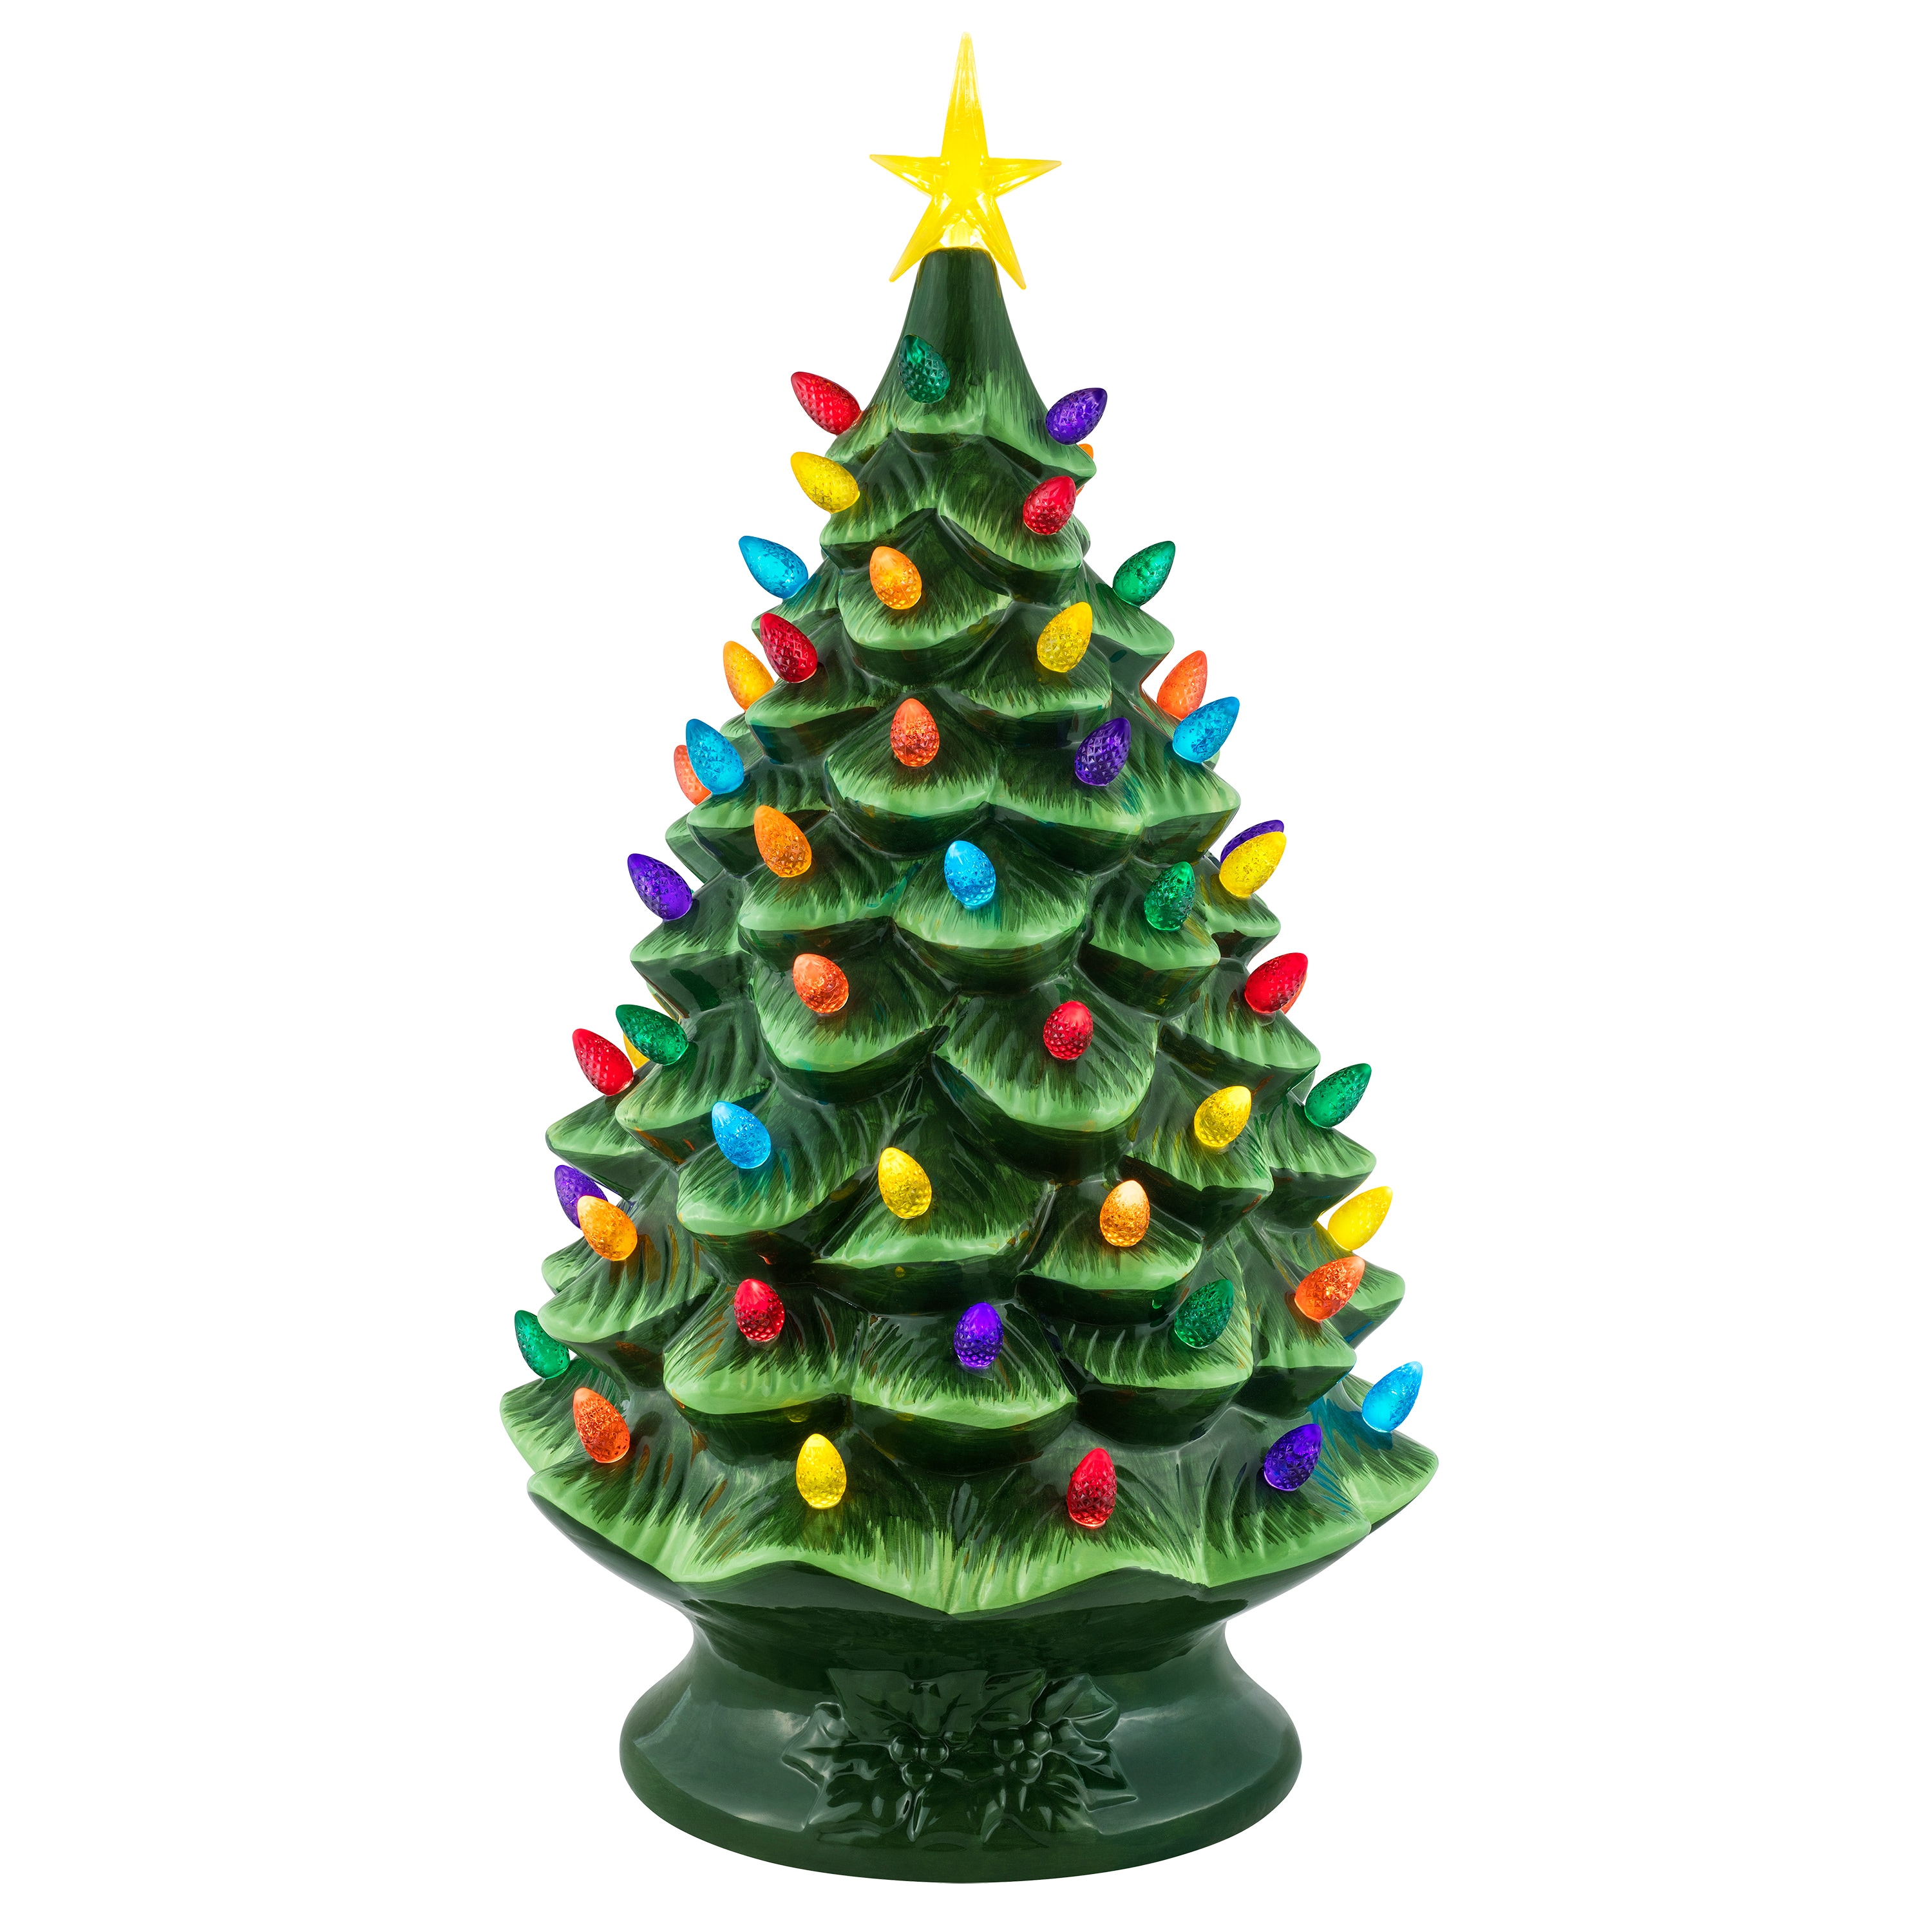 24-in Lighted DC Tree in the Christmas Decor department at Lowes.com